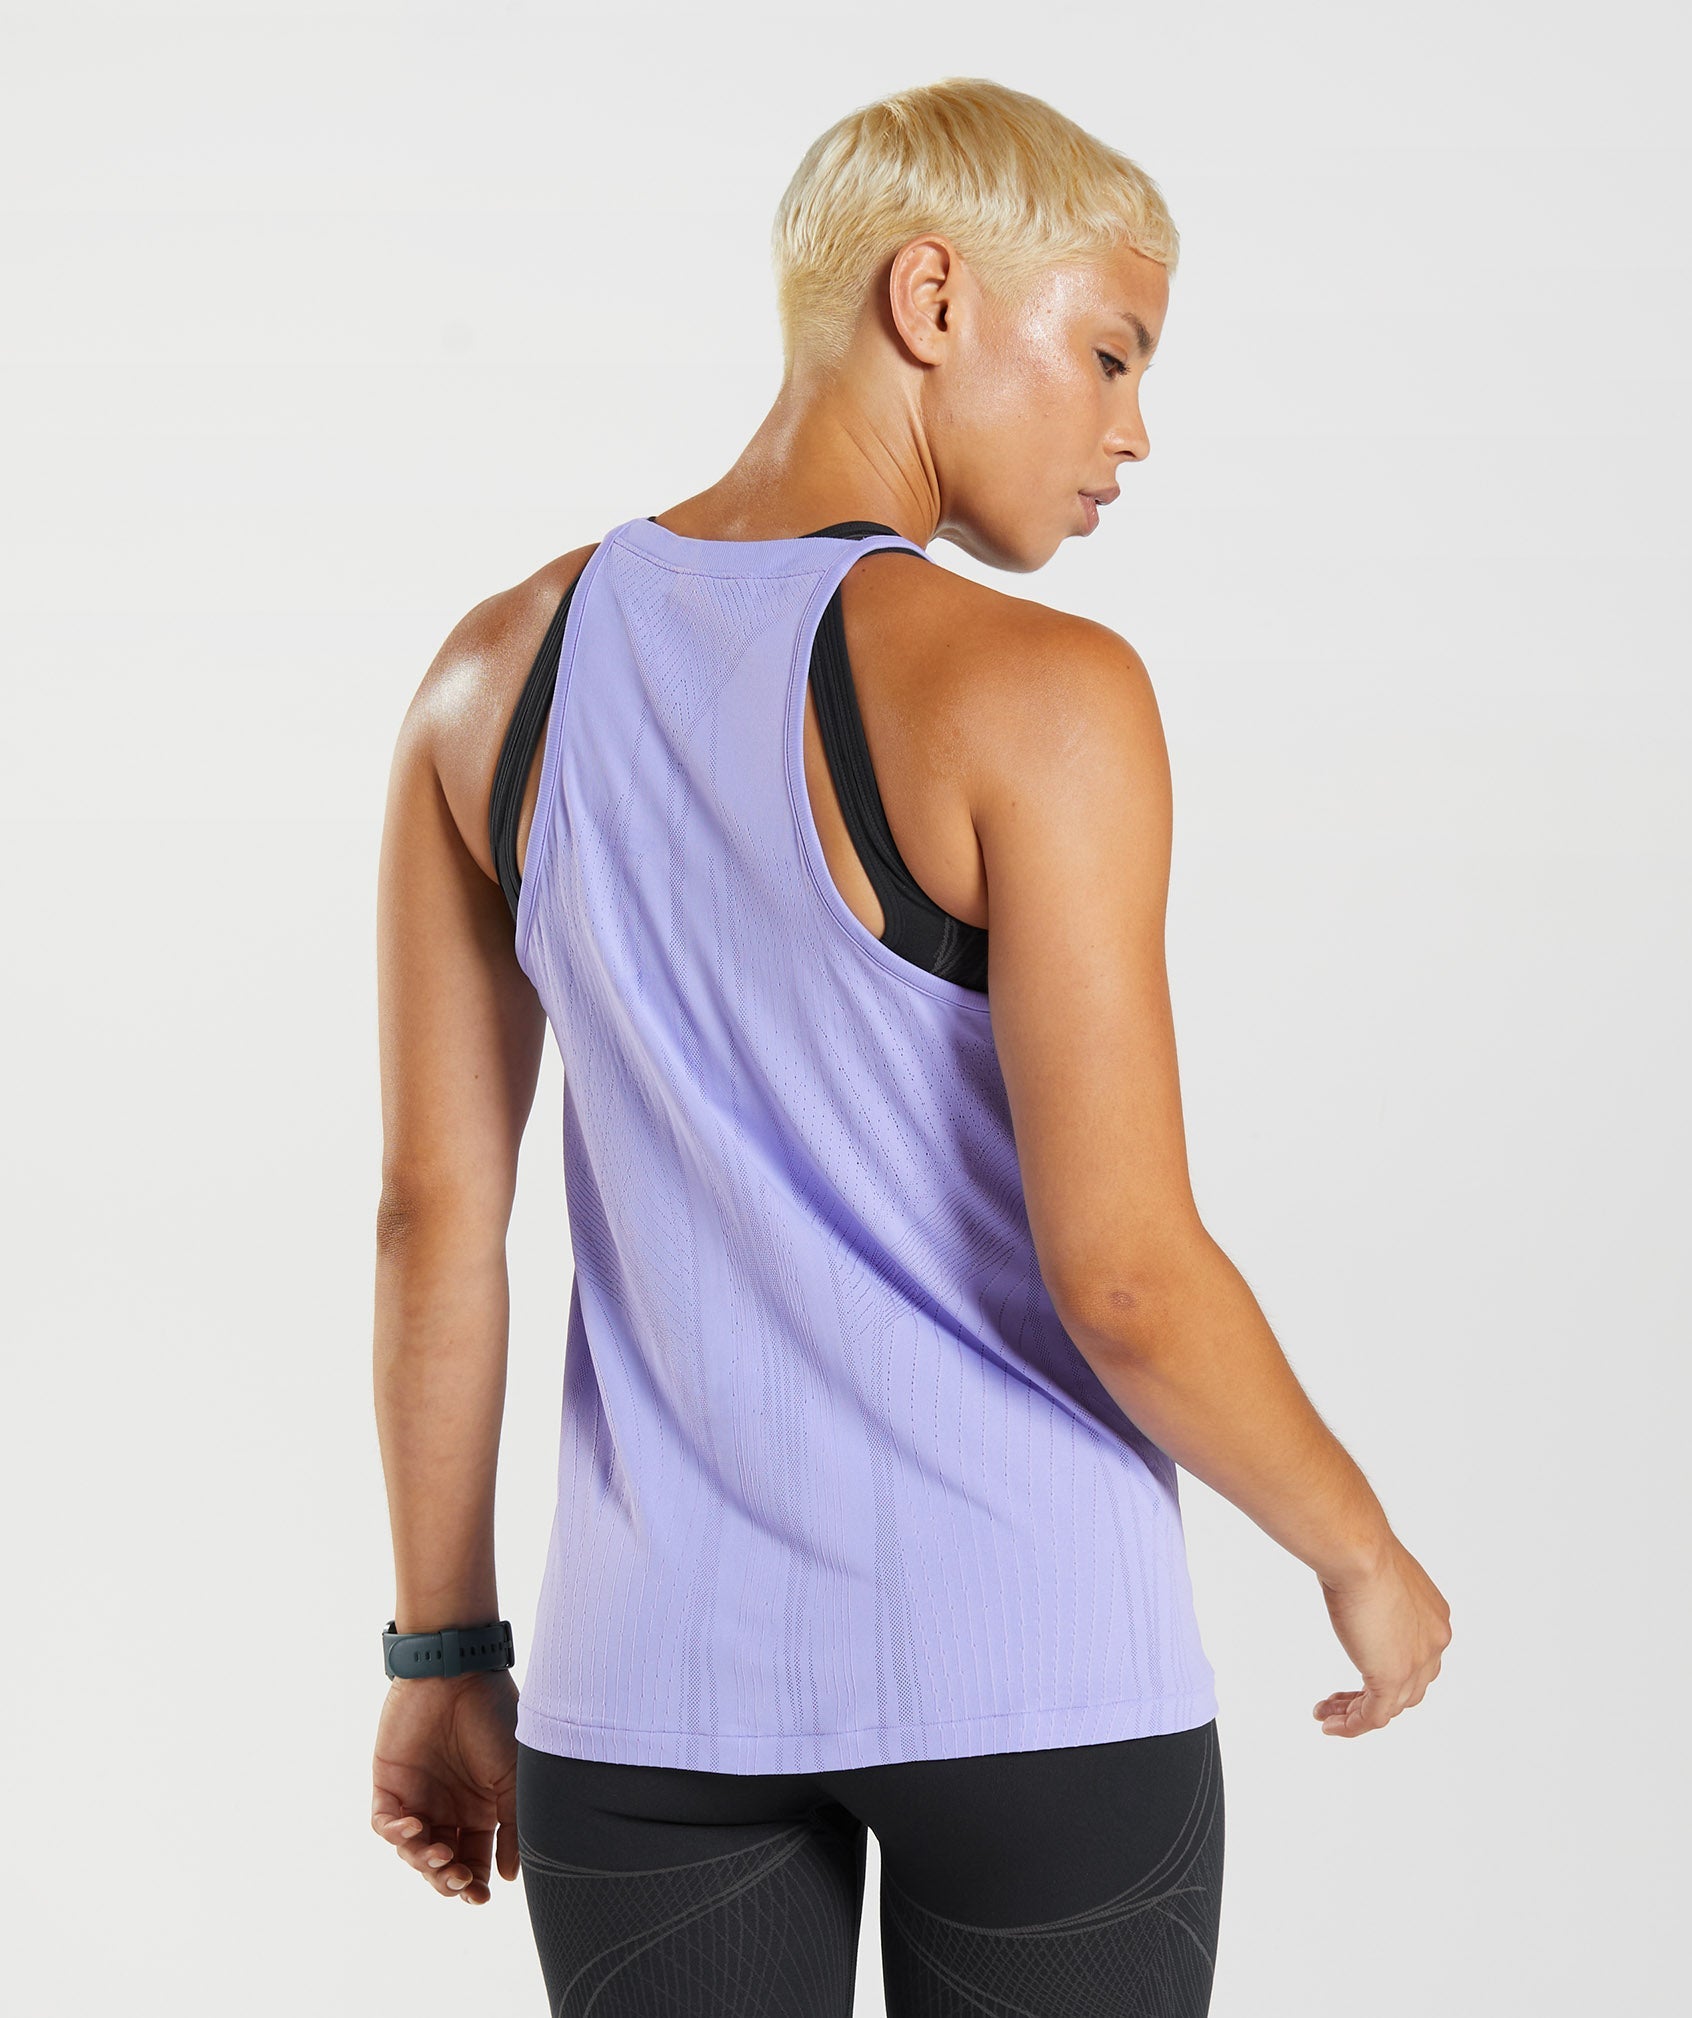 Apex Seamless Tank in Dusted Violet/Digital Violet - view 2